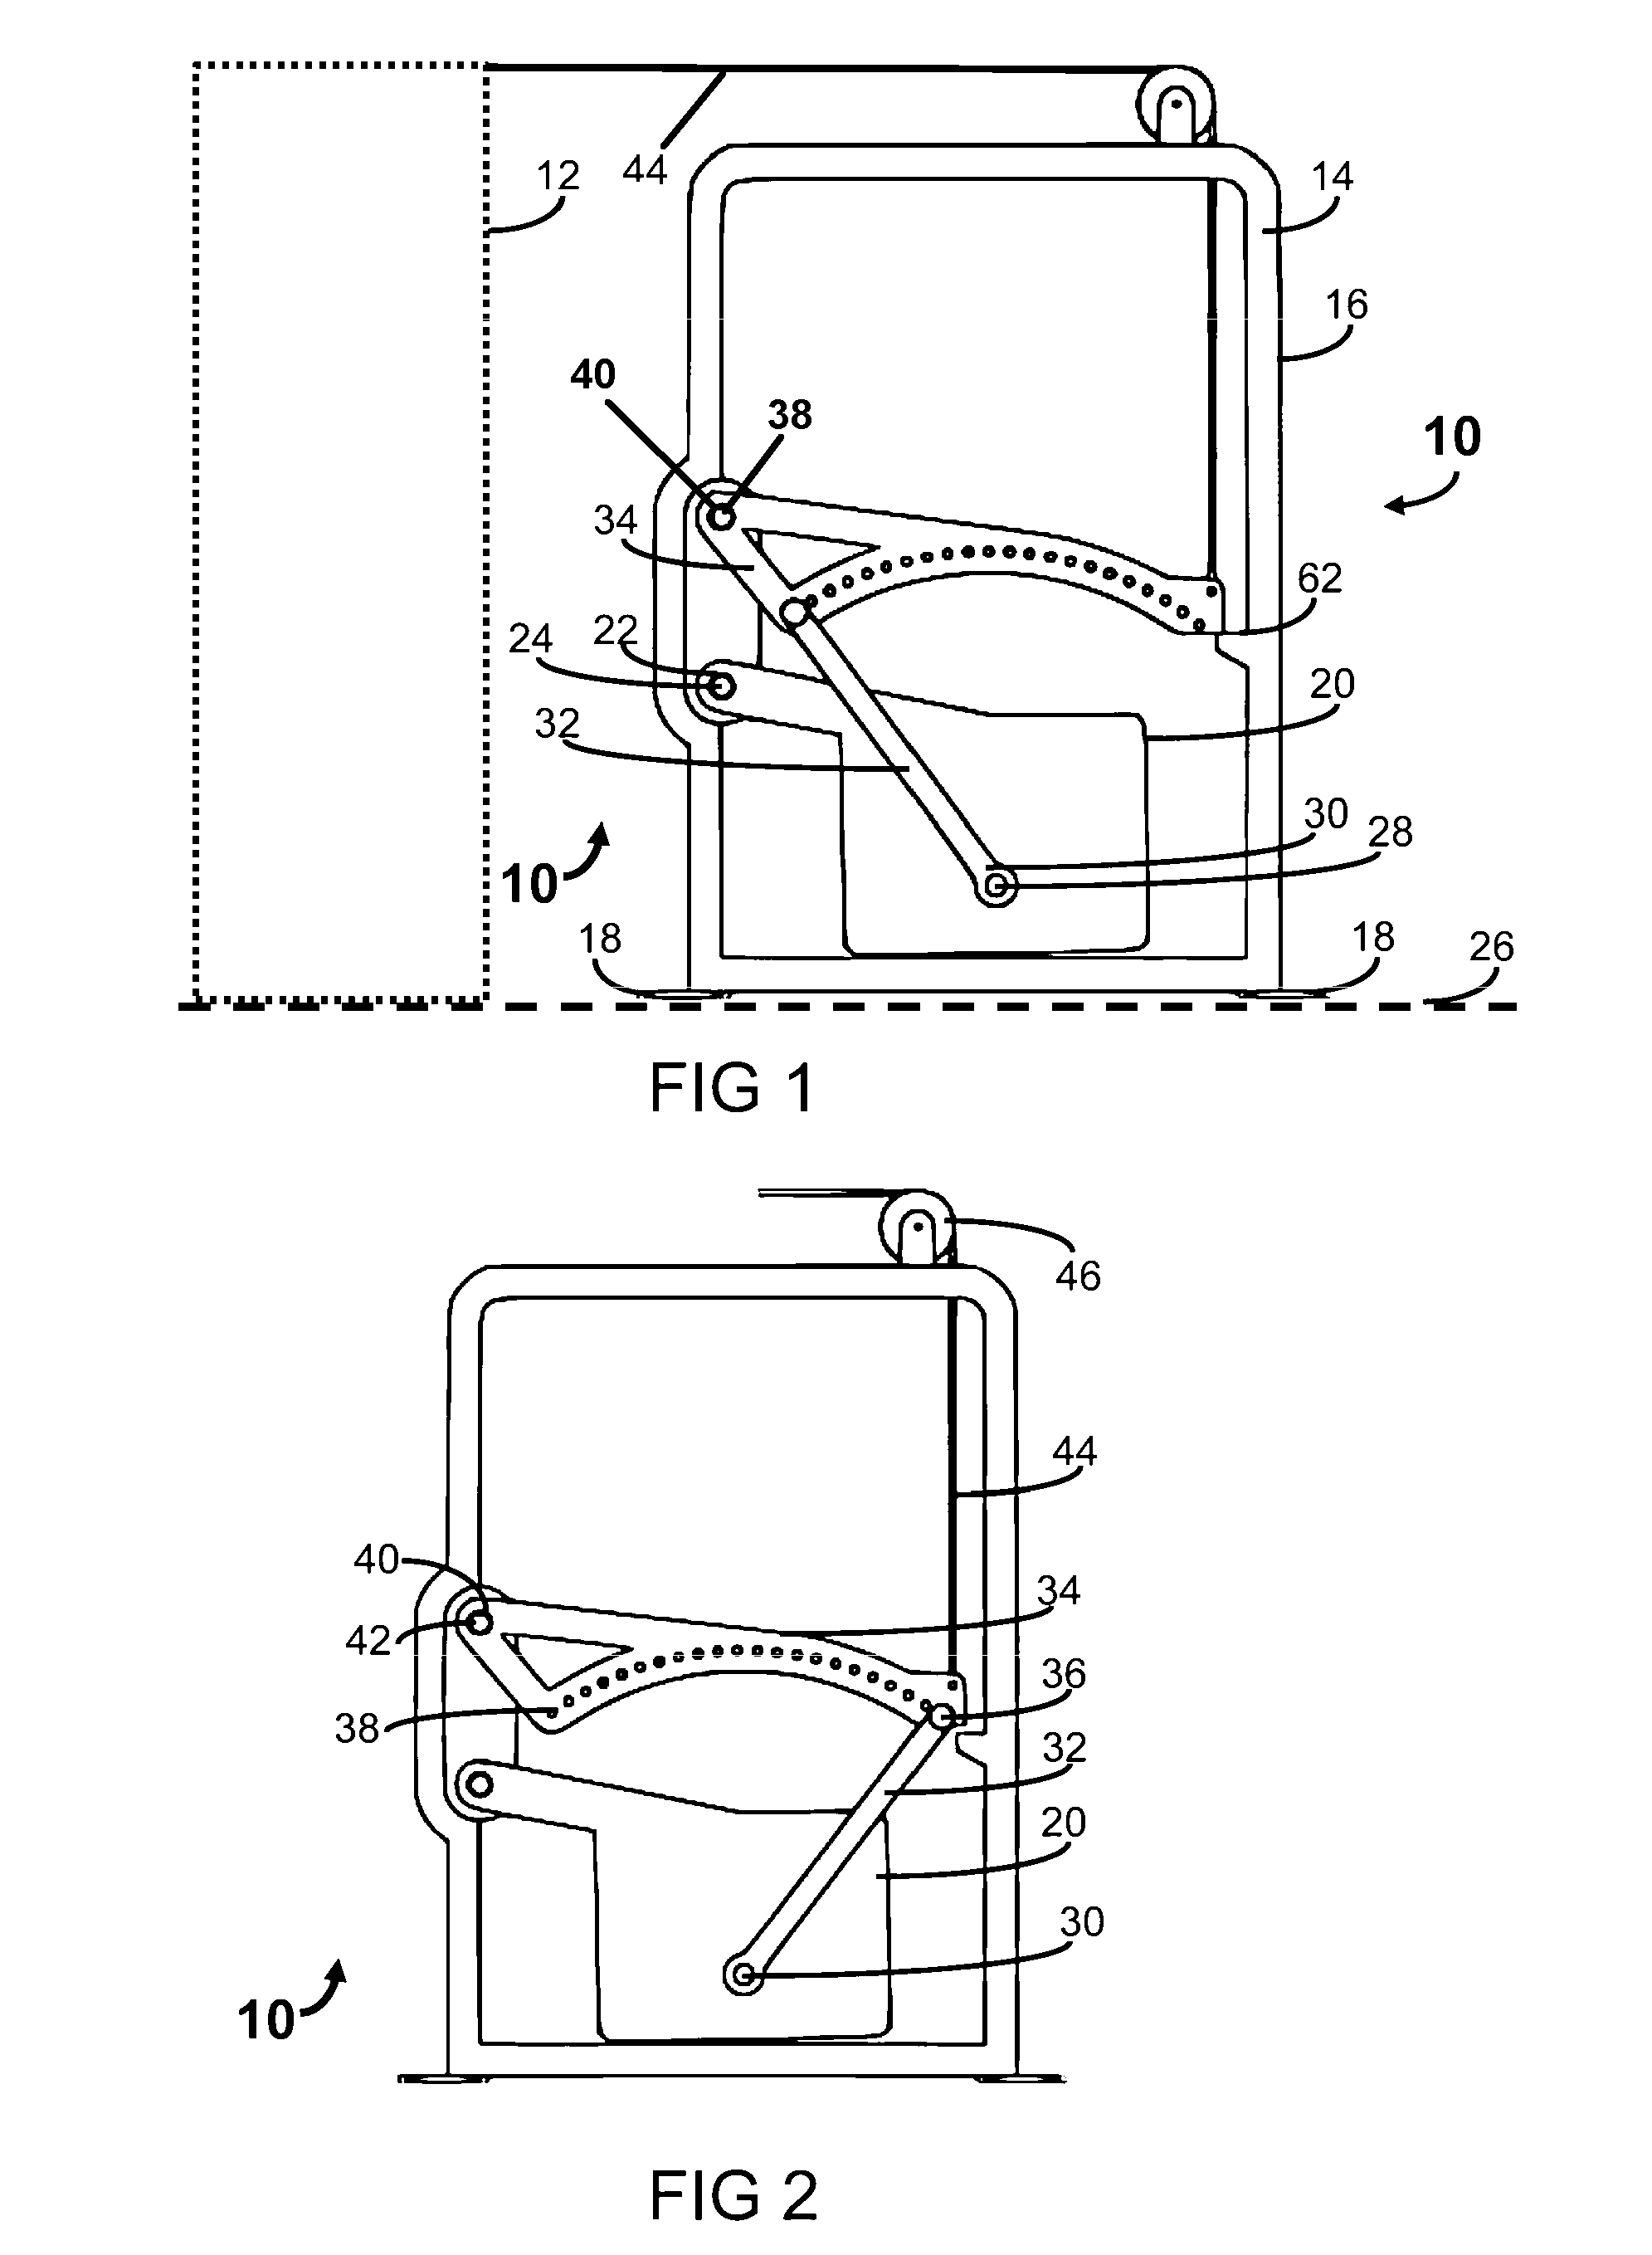 Exercise Weight Selection Device and Method